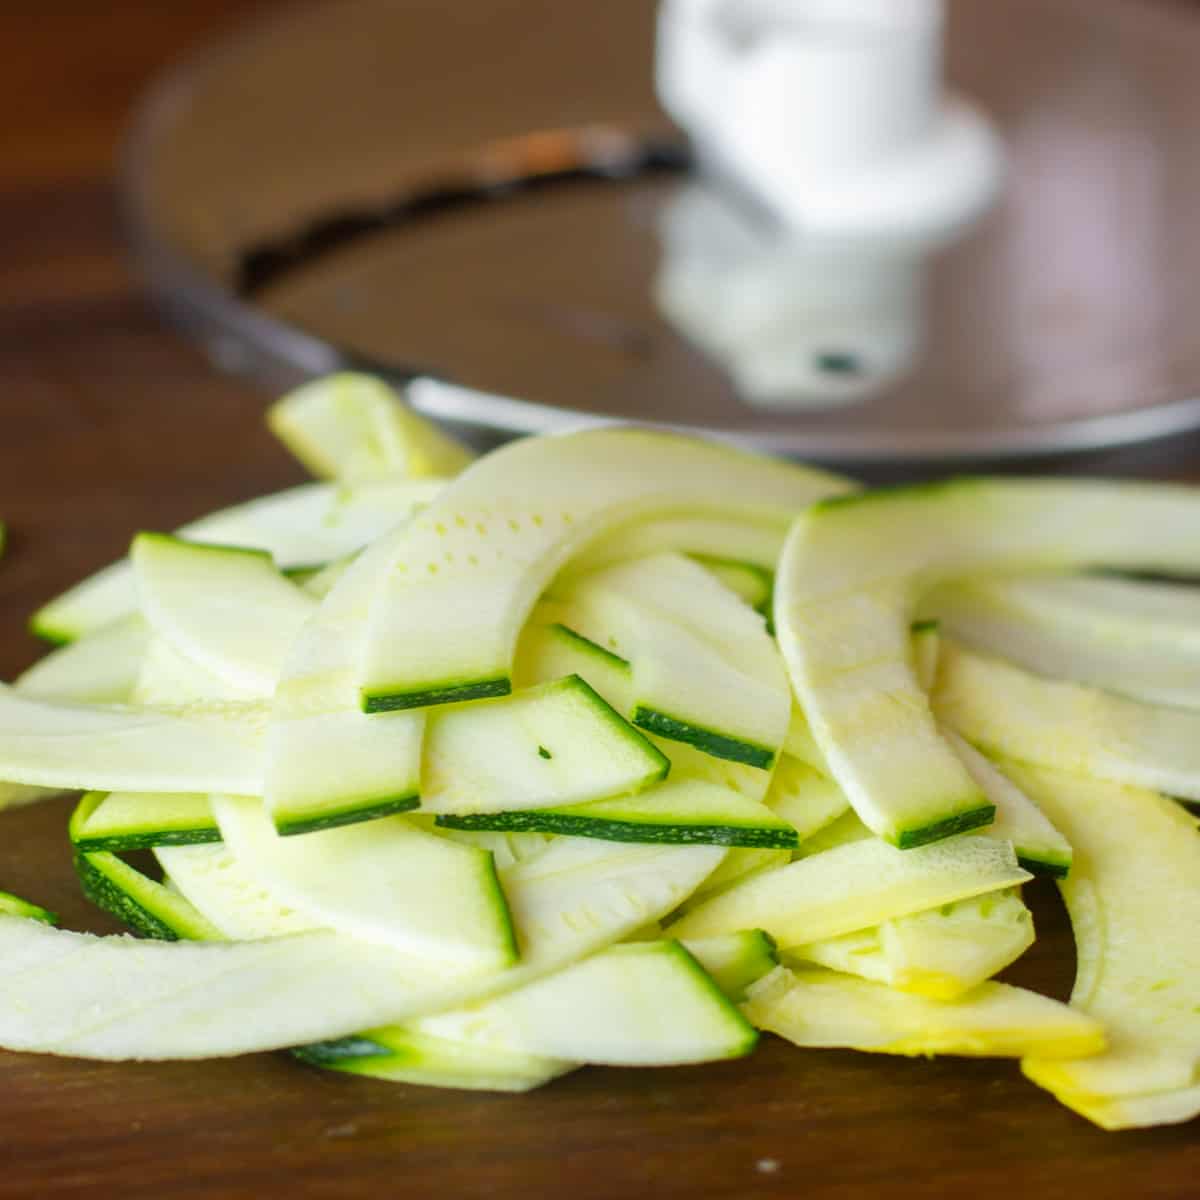 Zucchini and yellow squash sliced into thin strips.